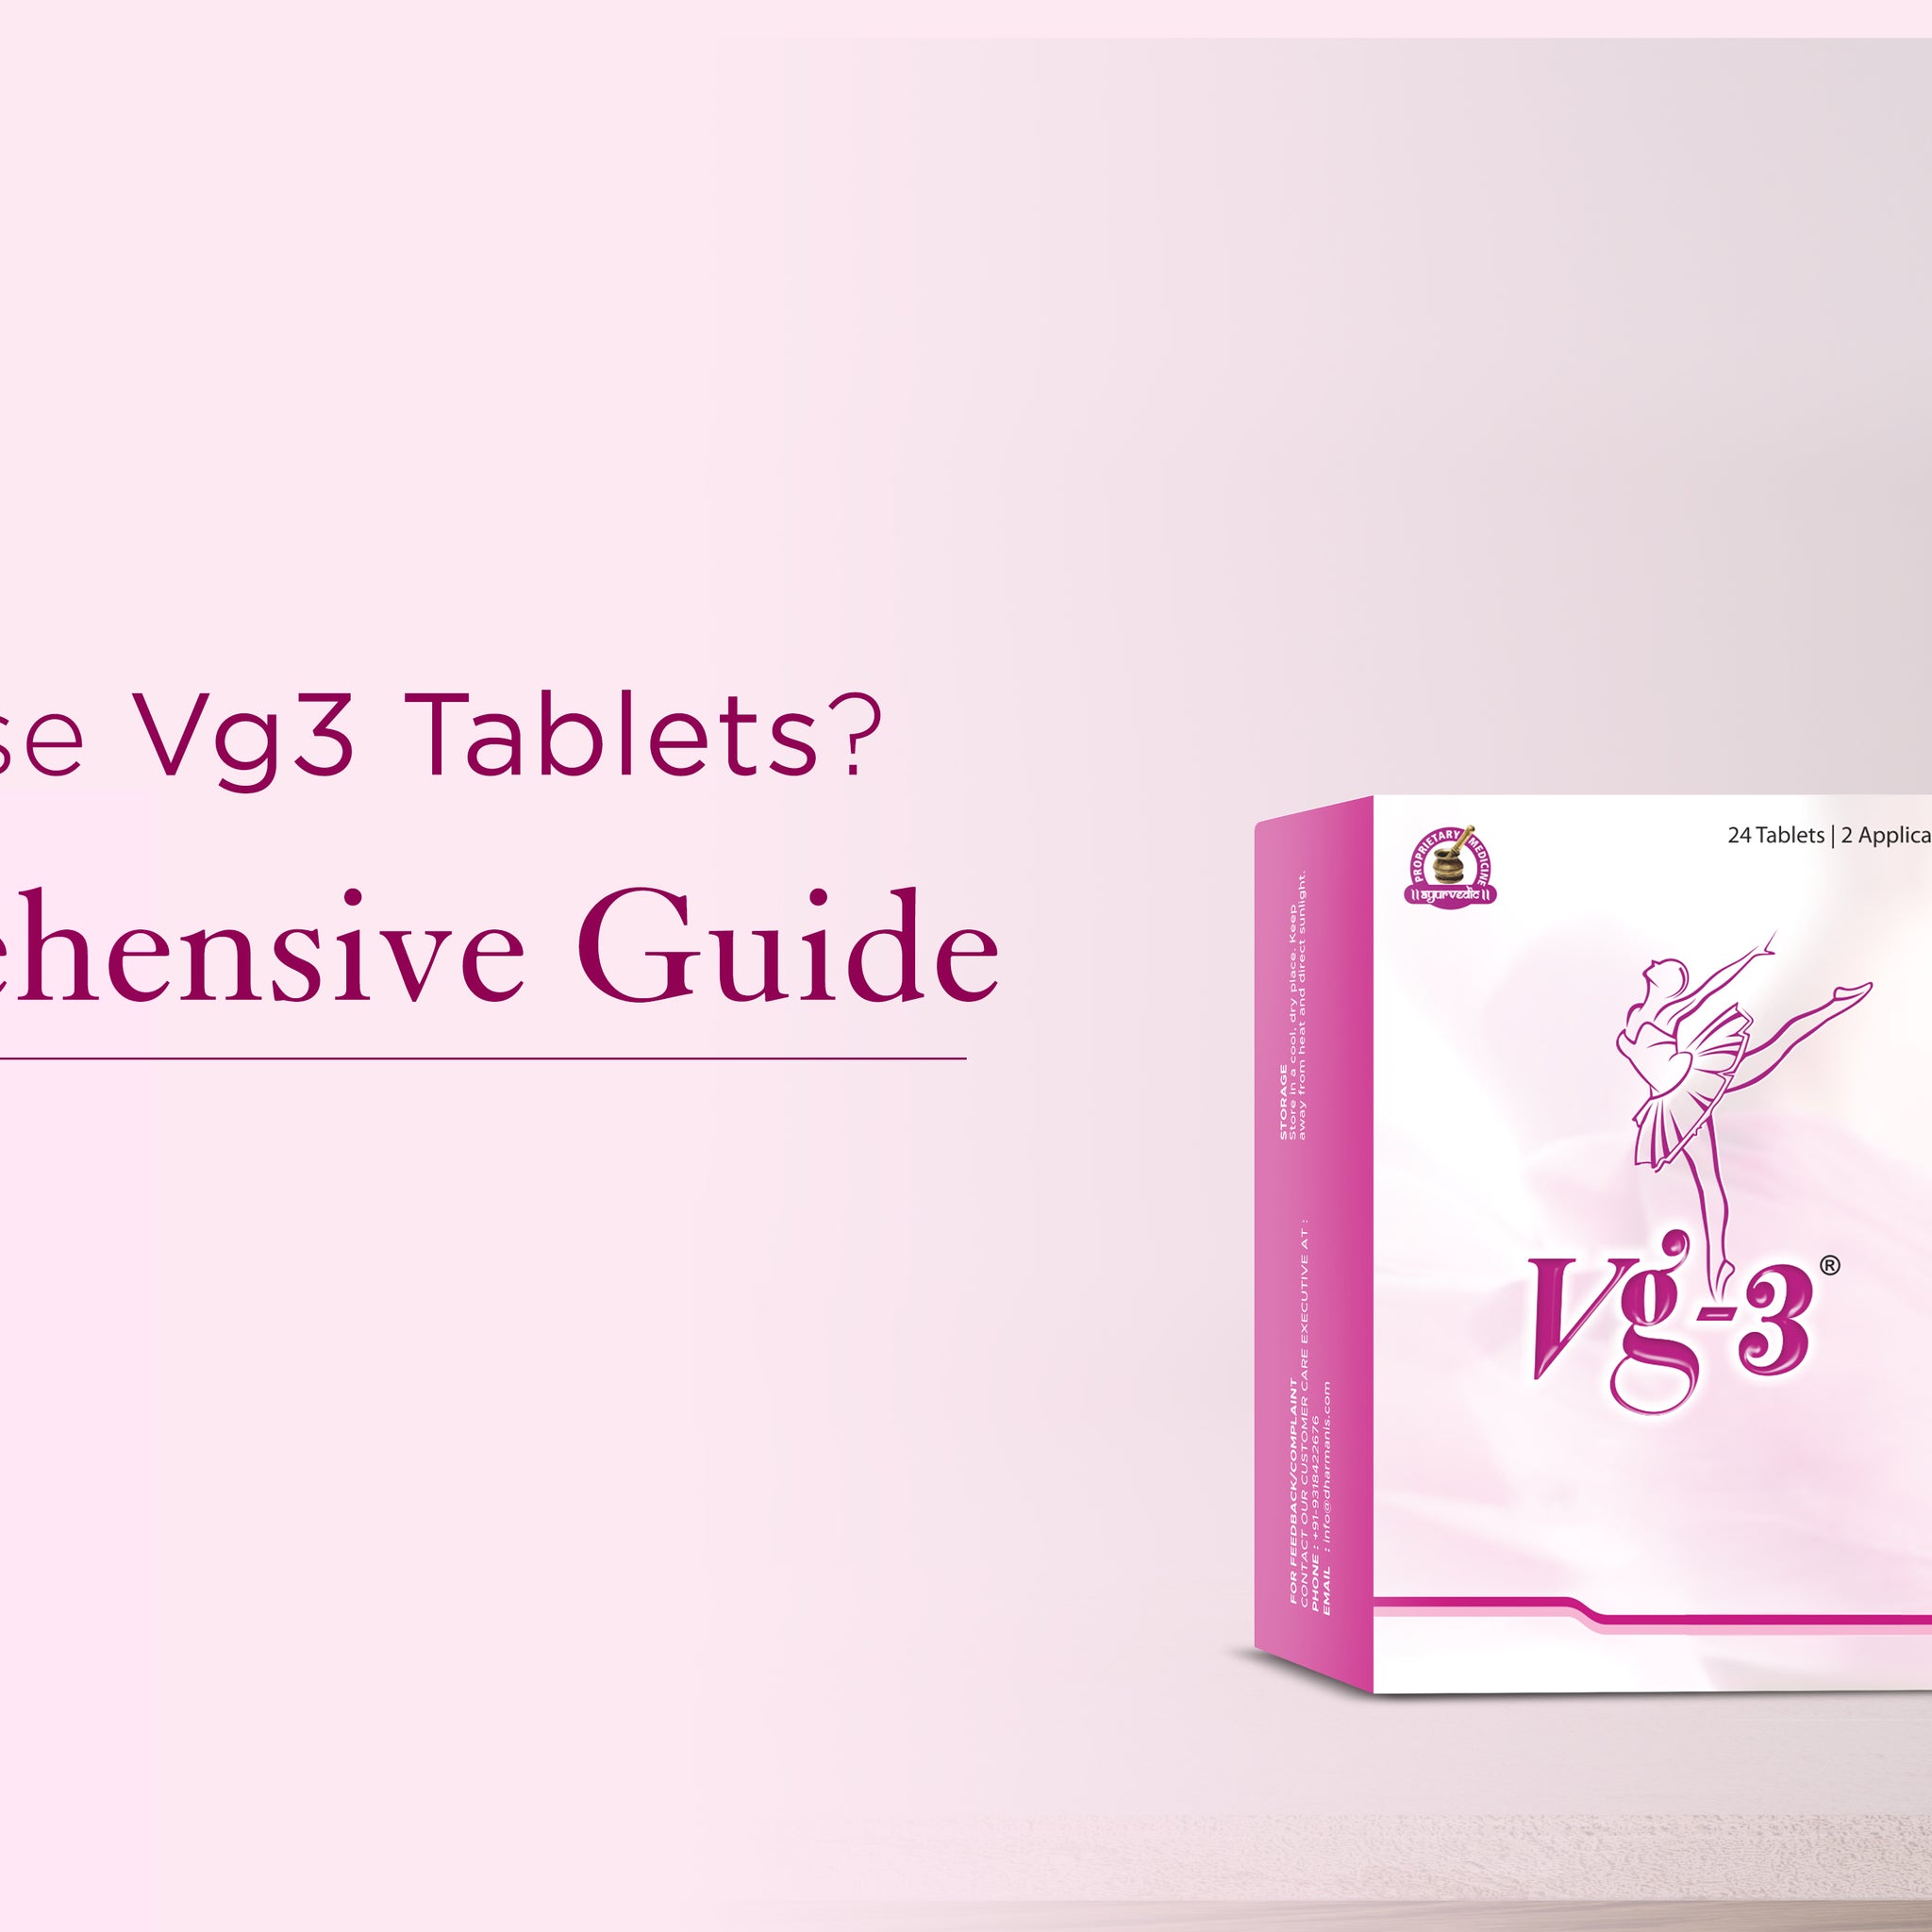 How to Use Vg3 Tablets? A Comprehensive Guide